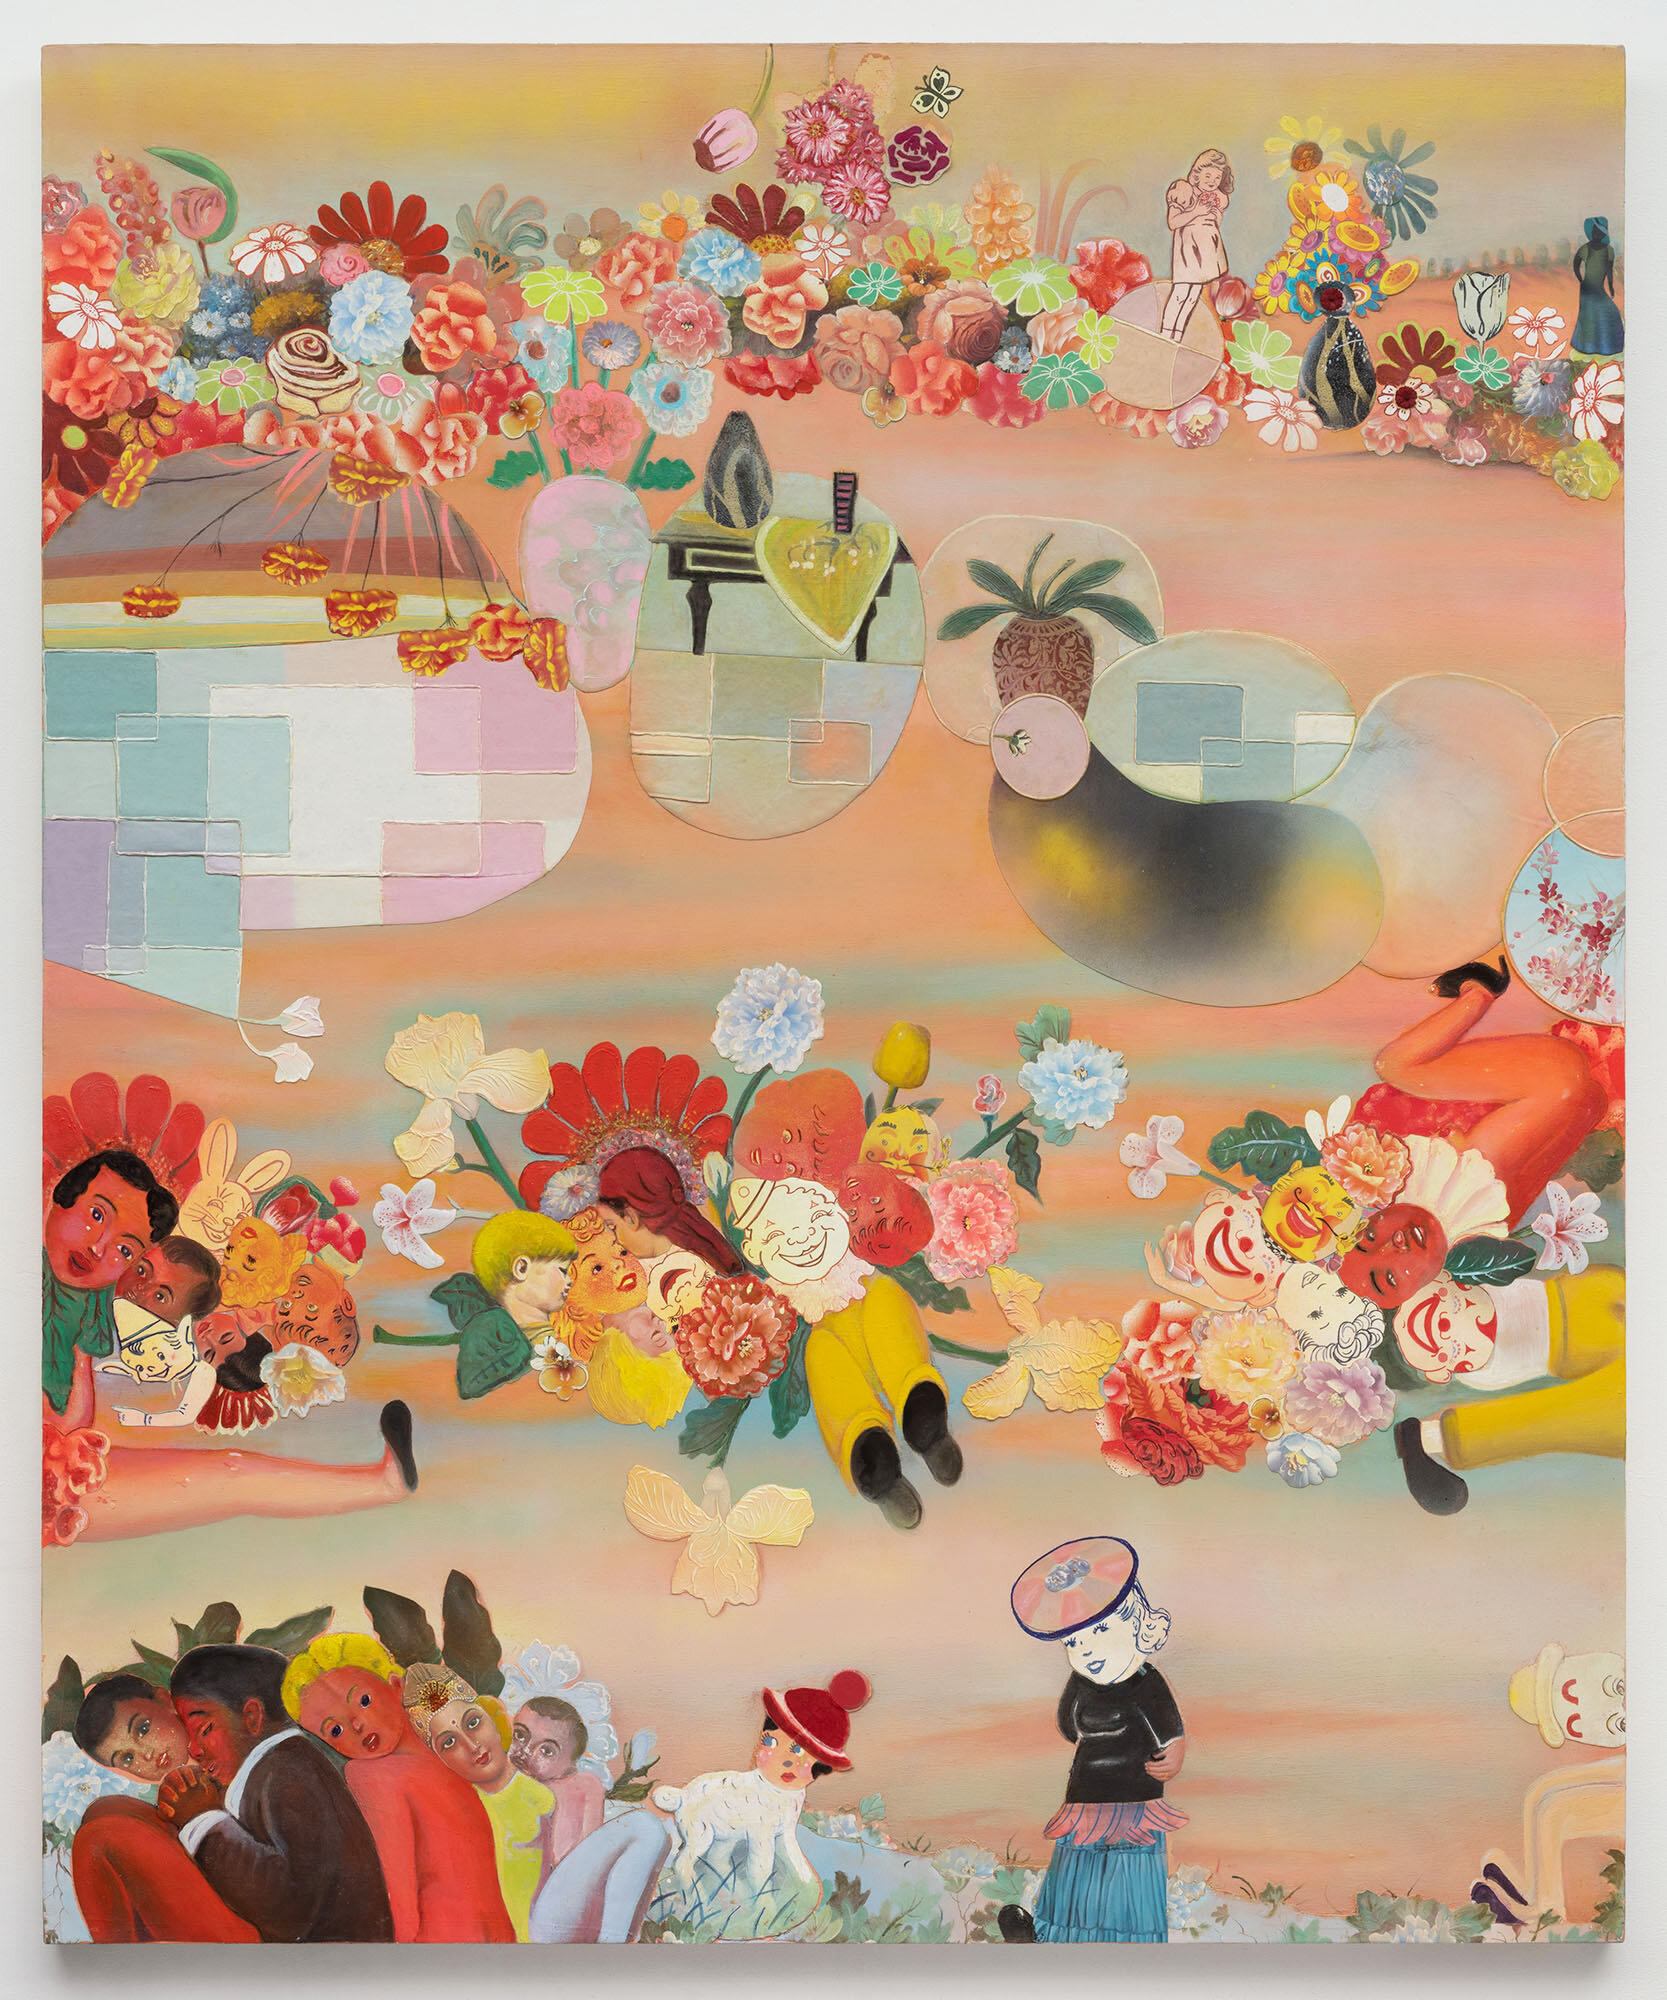 What Went Wrong?, 70" × 50", mixed media and collage on canvas, 2004